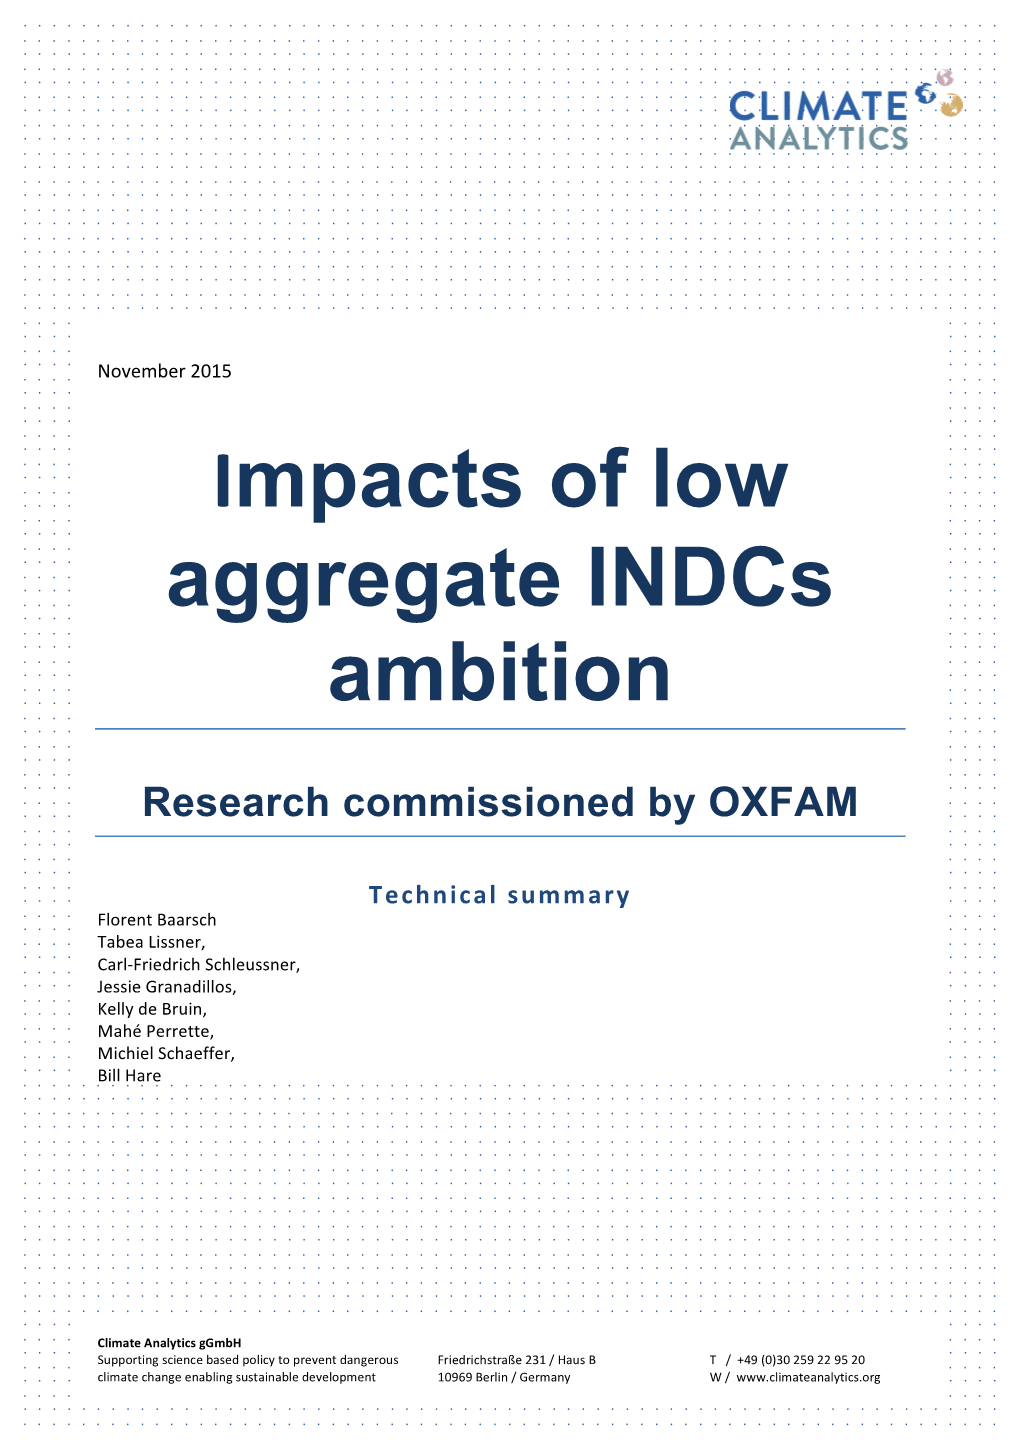 Impacts of Low Aggregate Indcs Ambition: Research Commissioned